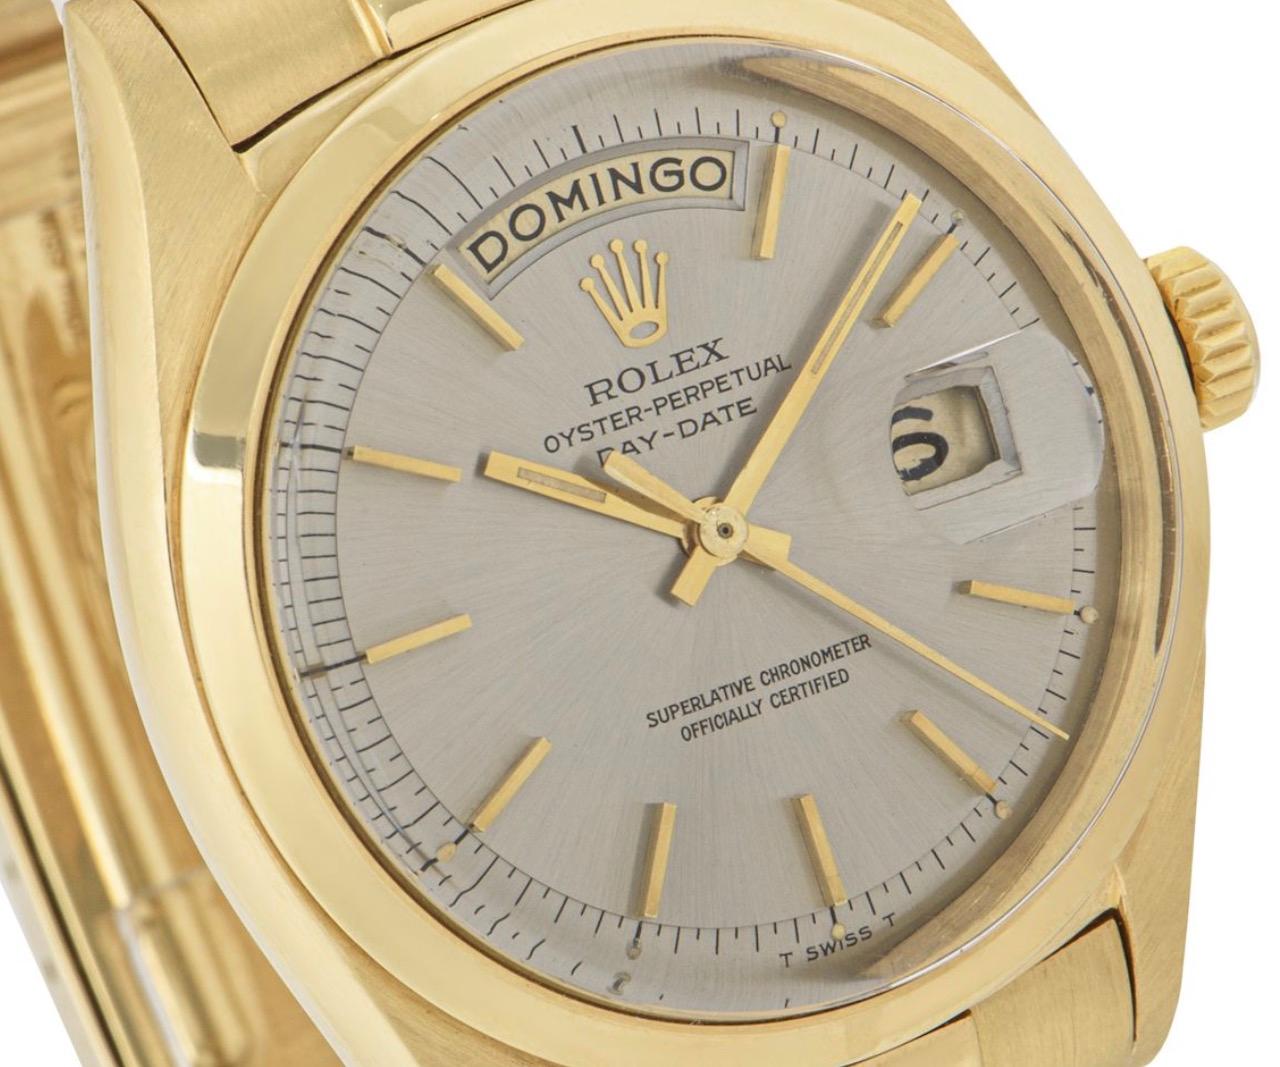 Vintage Rolex Day-Date 18K Yellow Gold Silver Dial 1802 In Excellent Condition For Sale In London, GB